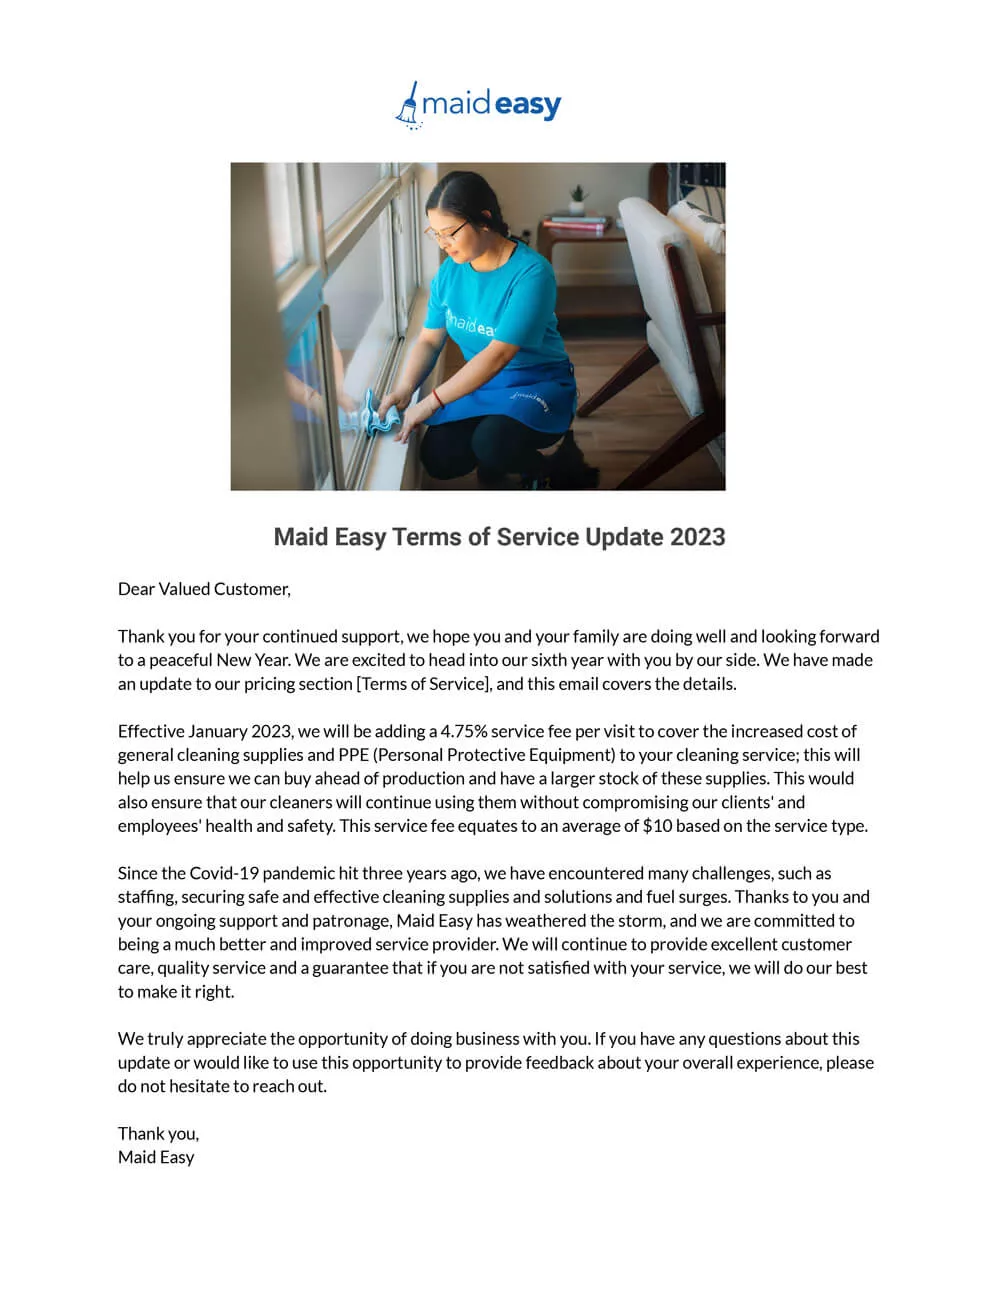 Maid Easy Service Policy Update 2023